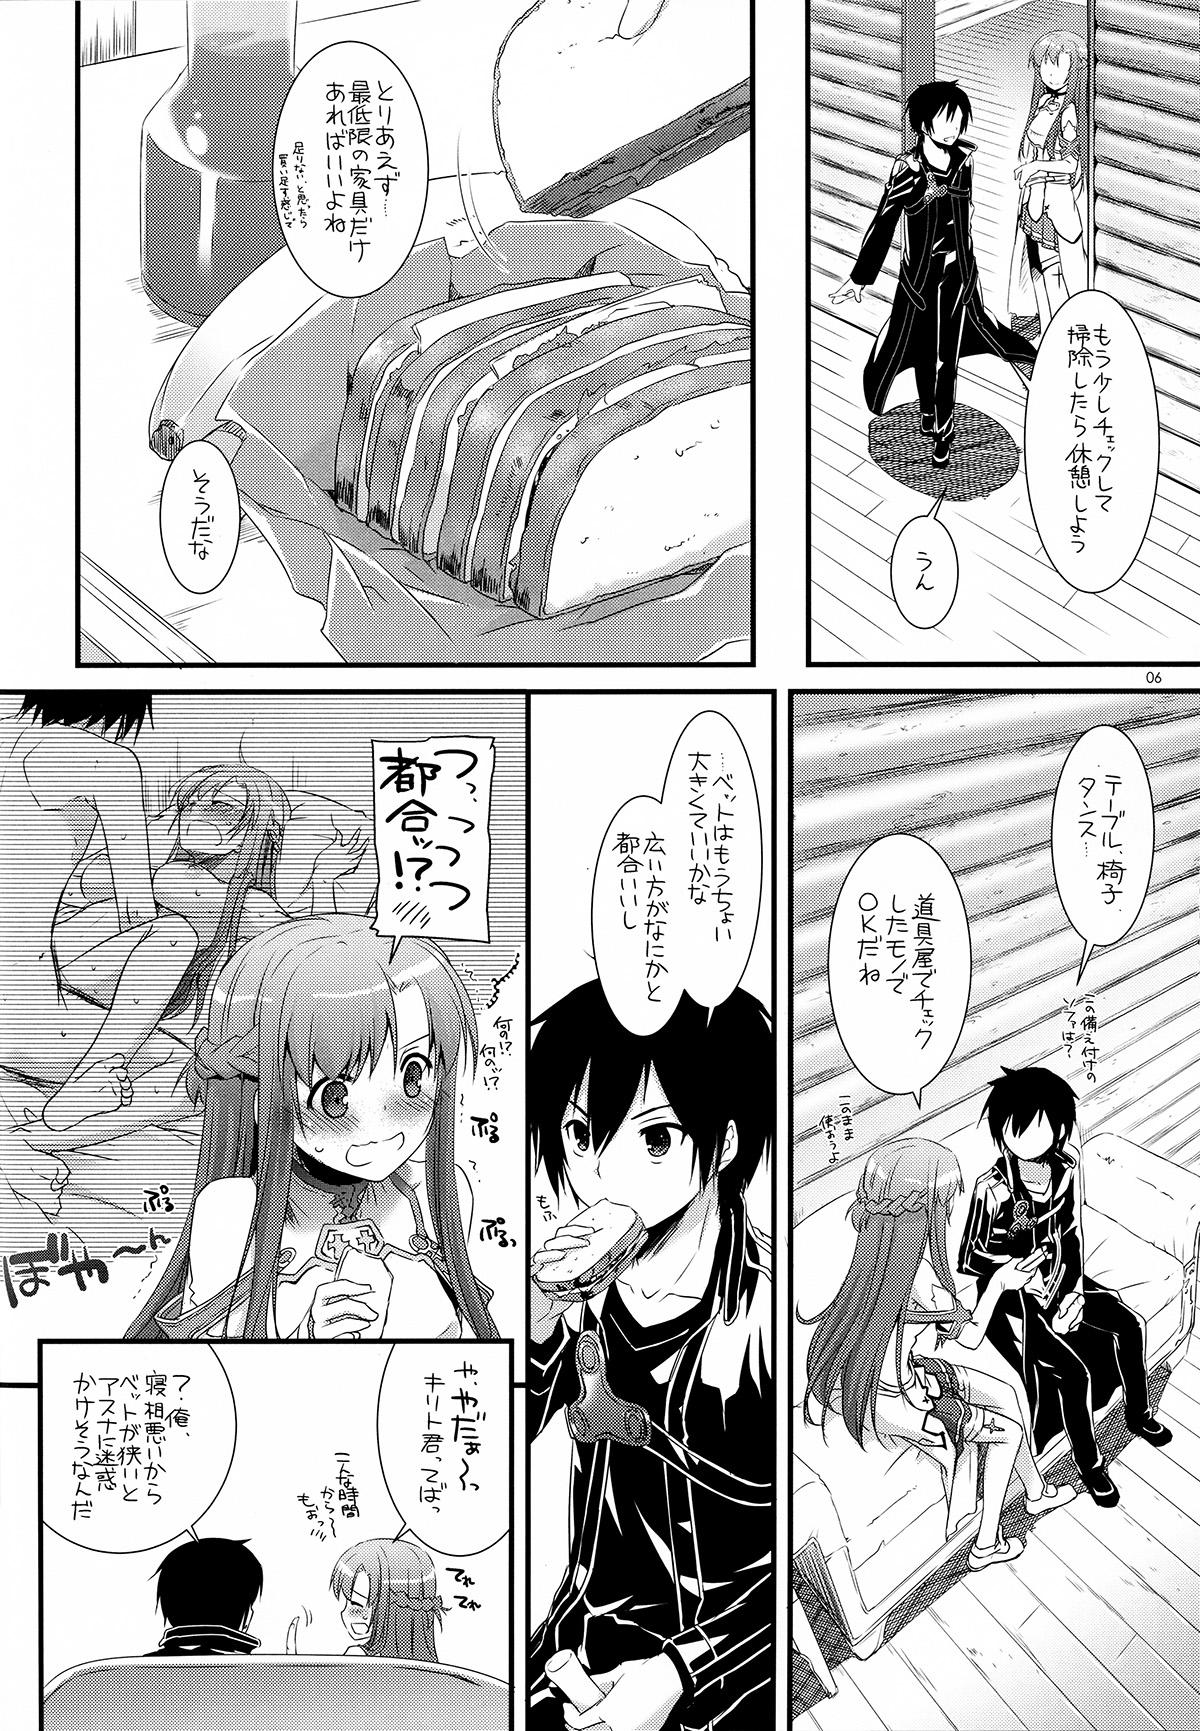 Teenage Porn D.L.action 71 - Sword art online First - Page 6